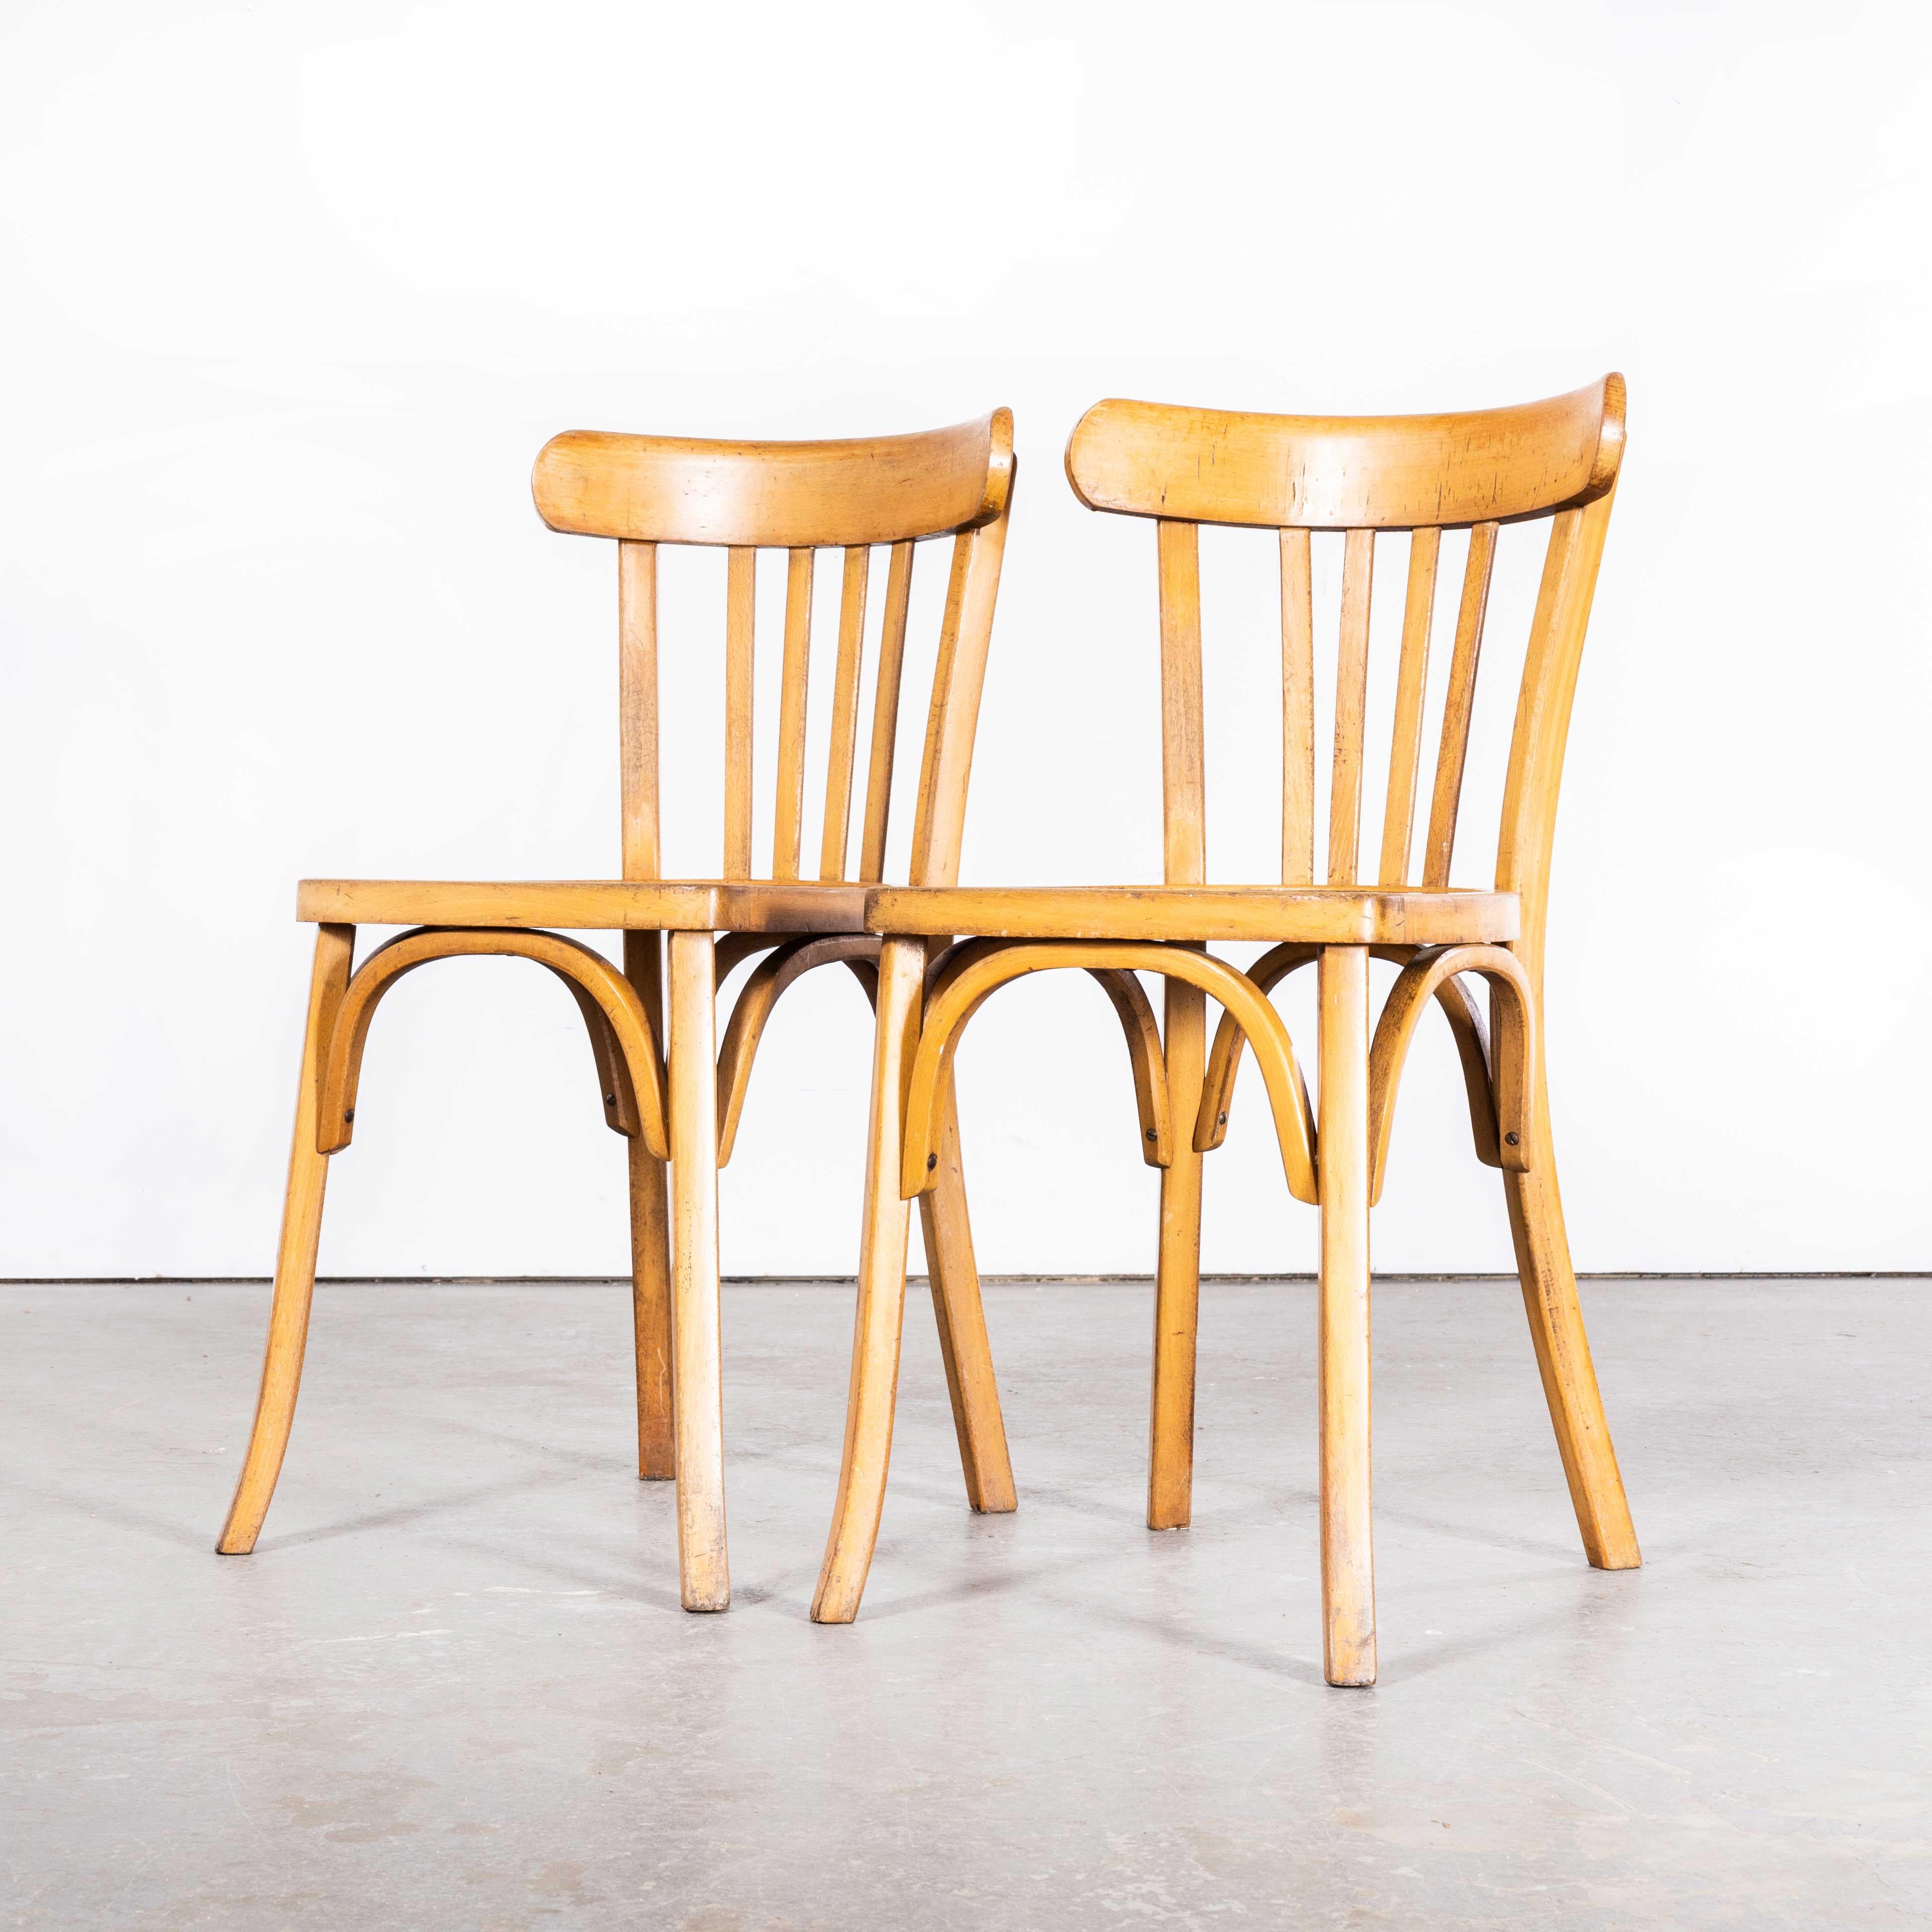 1950s Luterma Blonde Oak Bentwood Dining Chair - Set of Pair For Sale 5